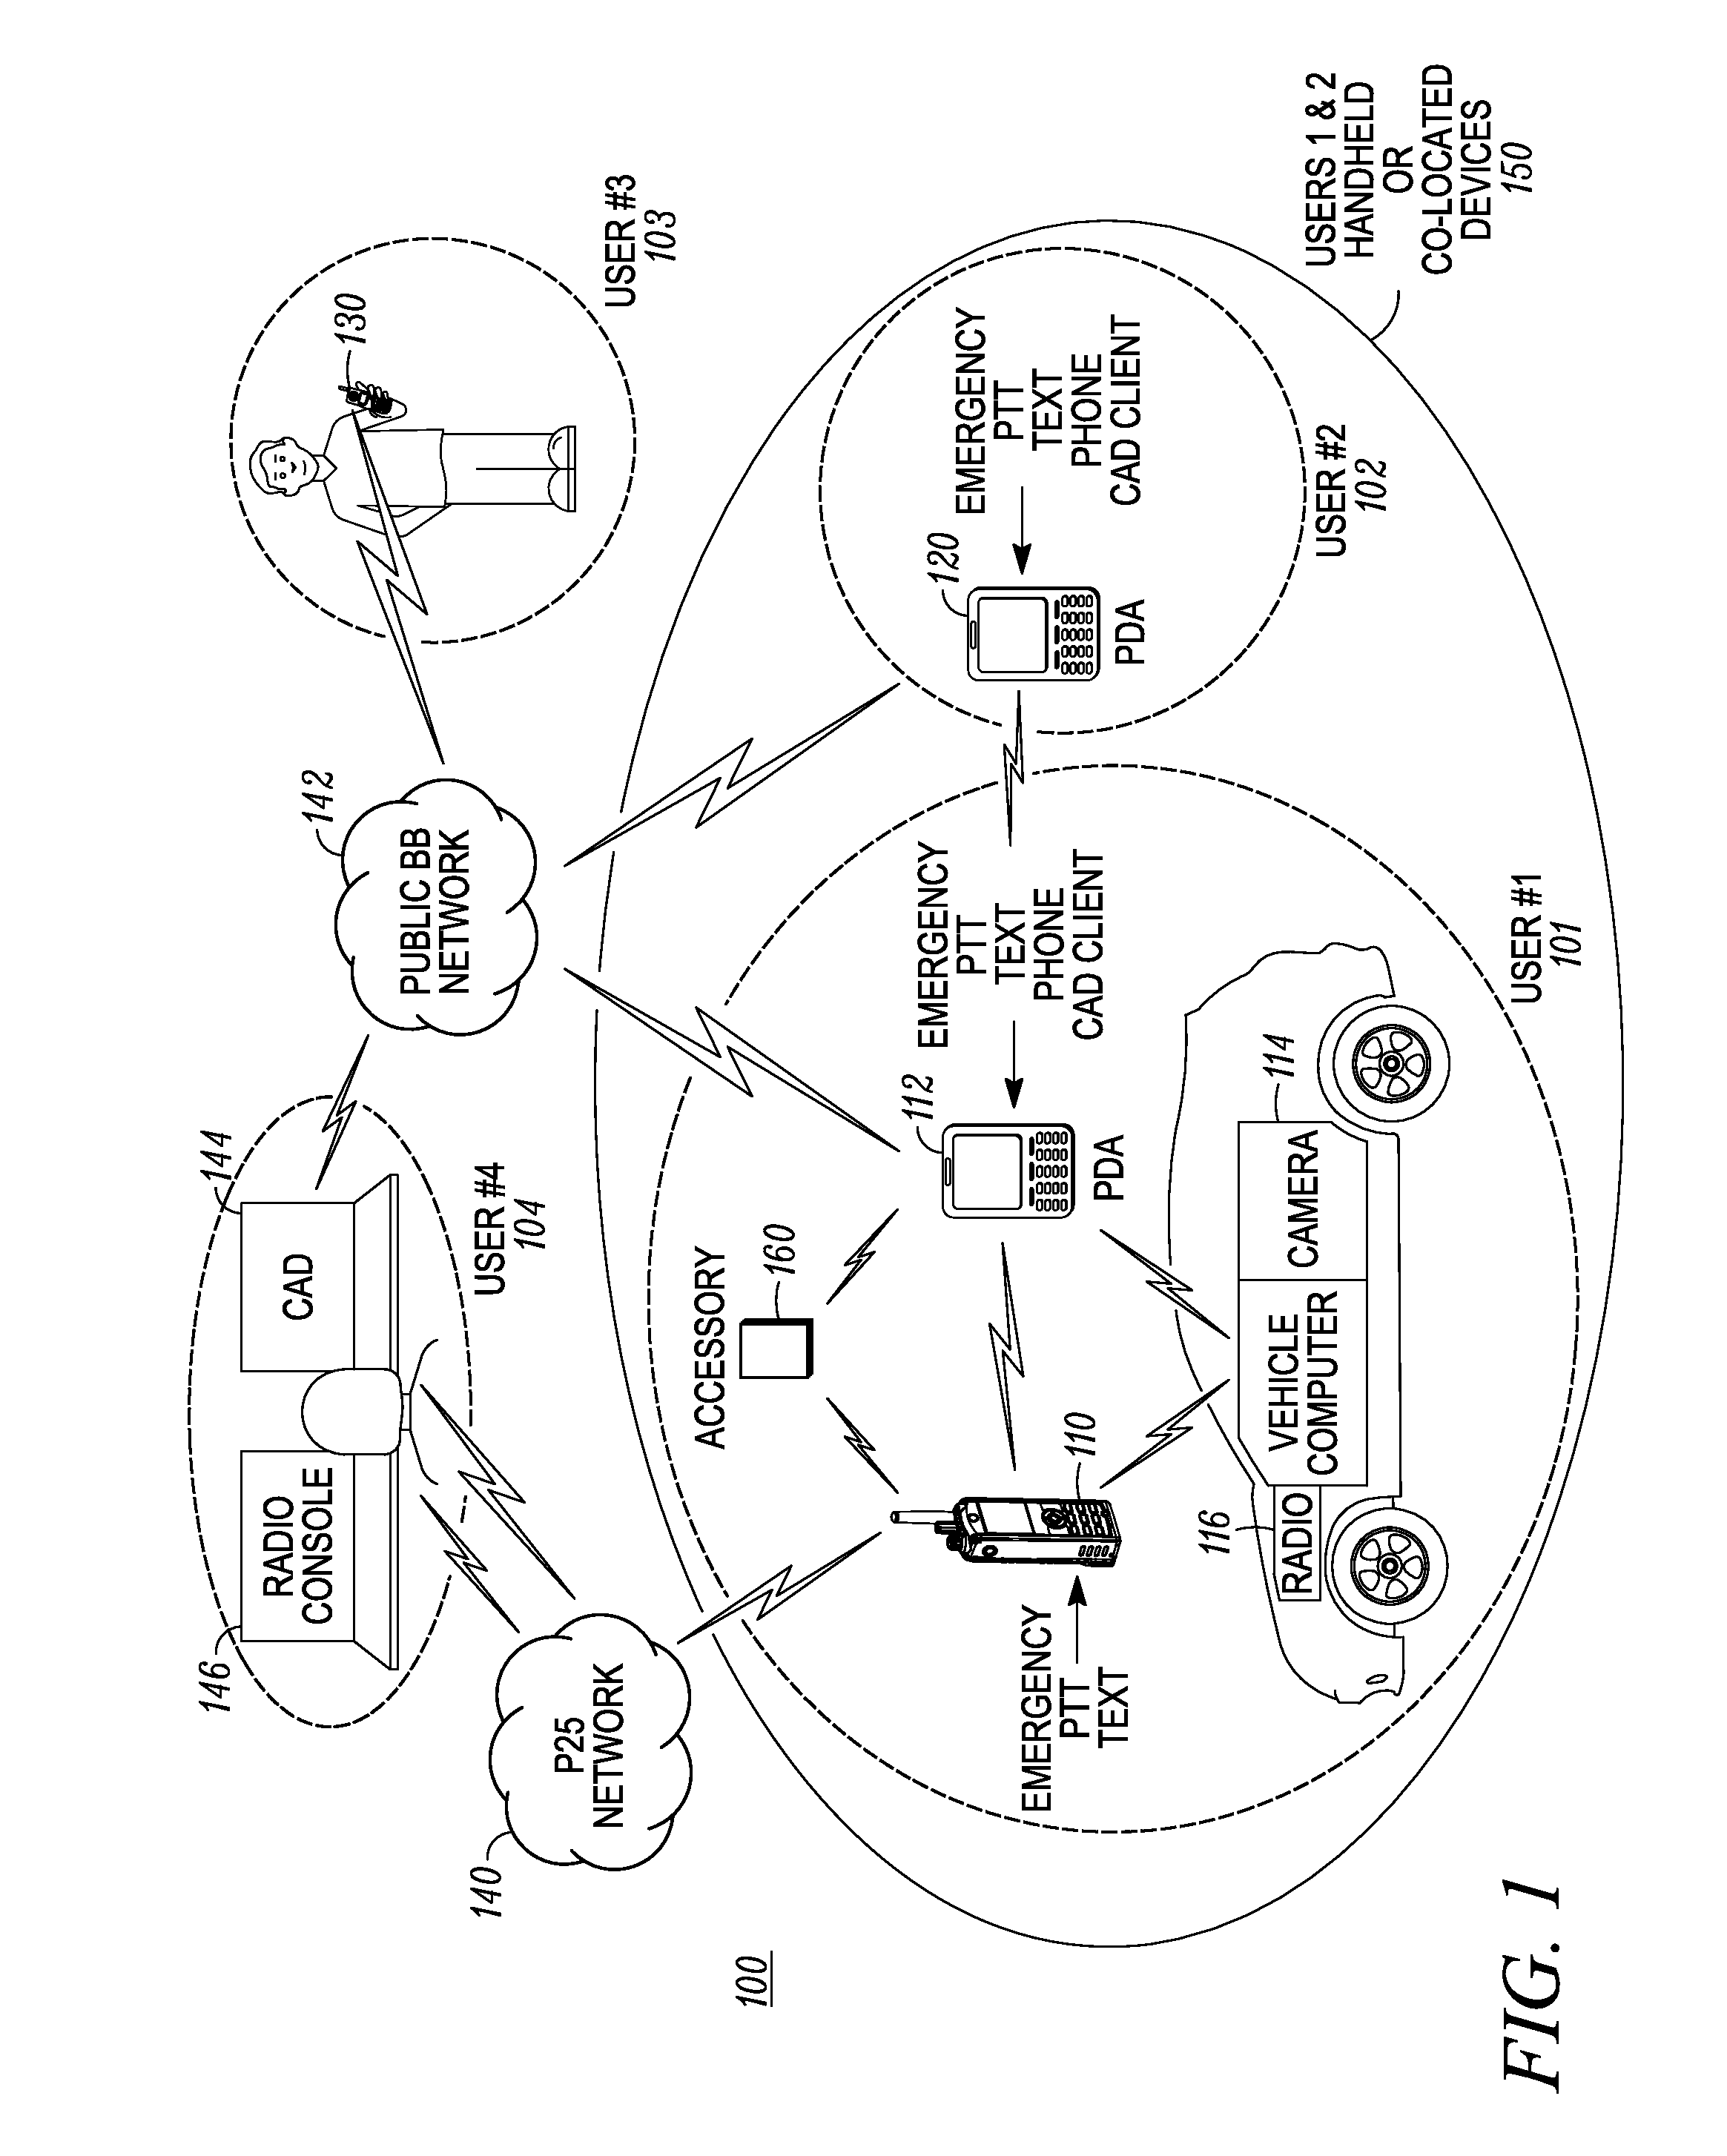 Method and apparatus for enhanced safety in a public safety communication system